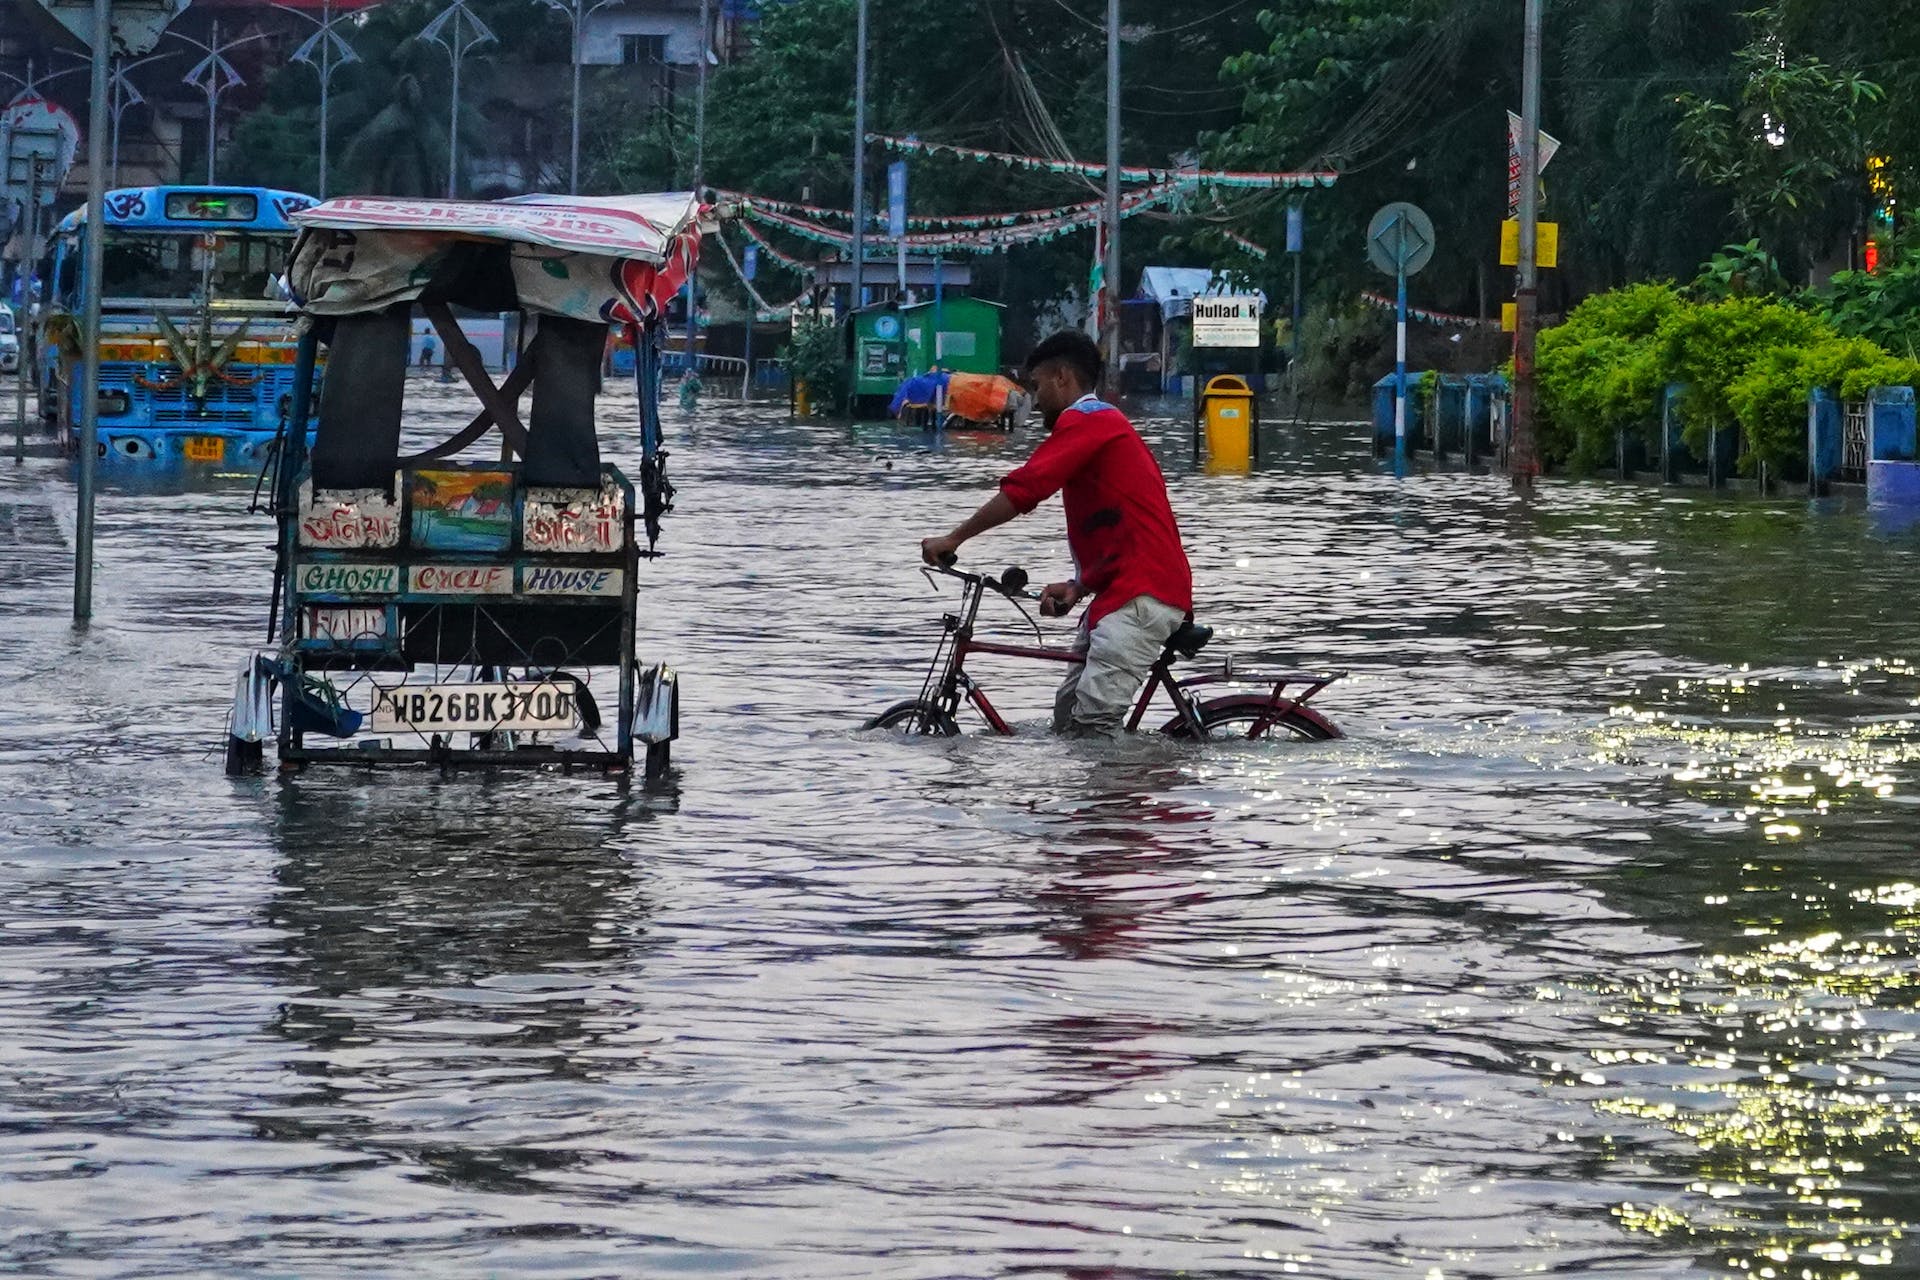 Man on bicycle and empty vehicles in flood water in Kolkata, India